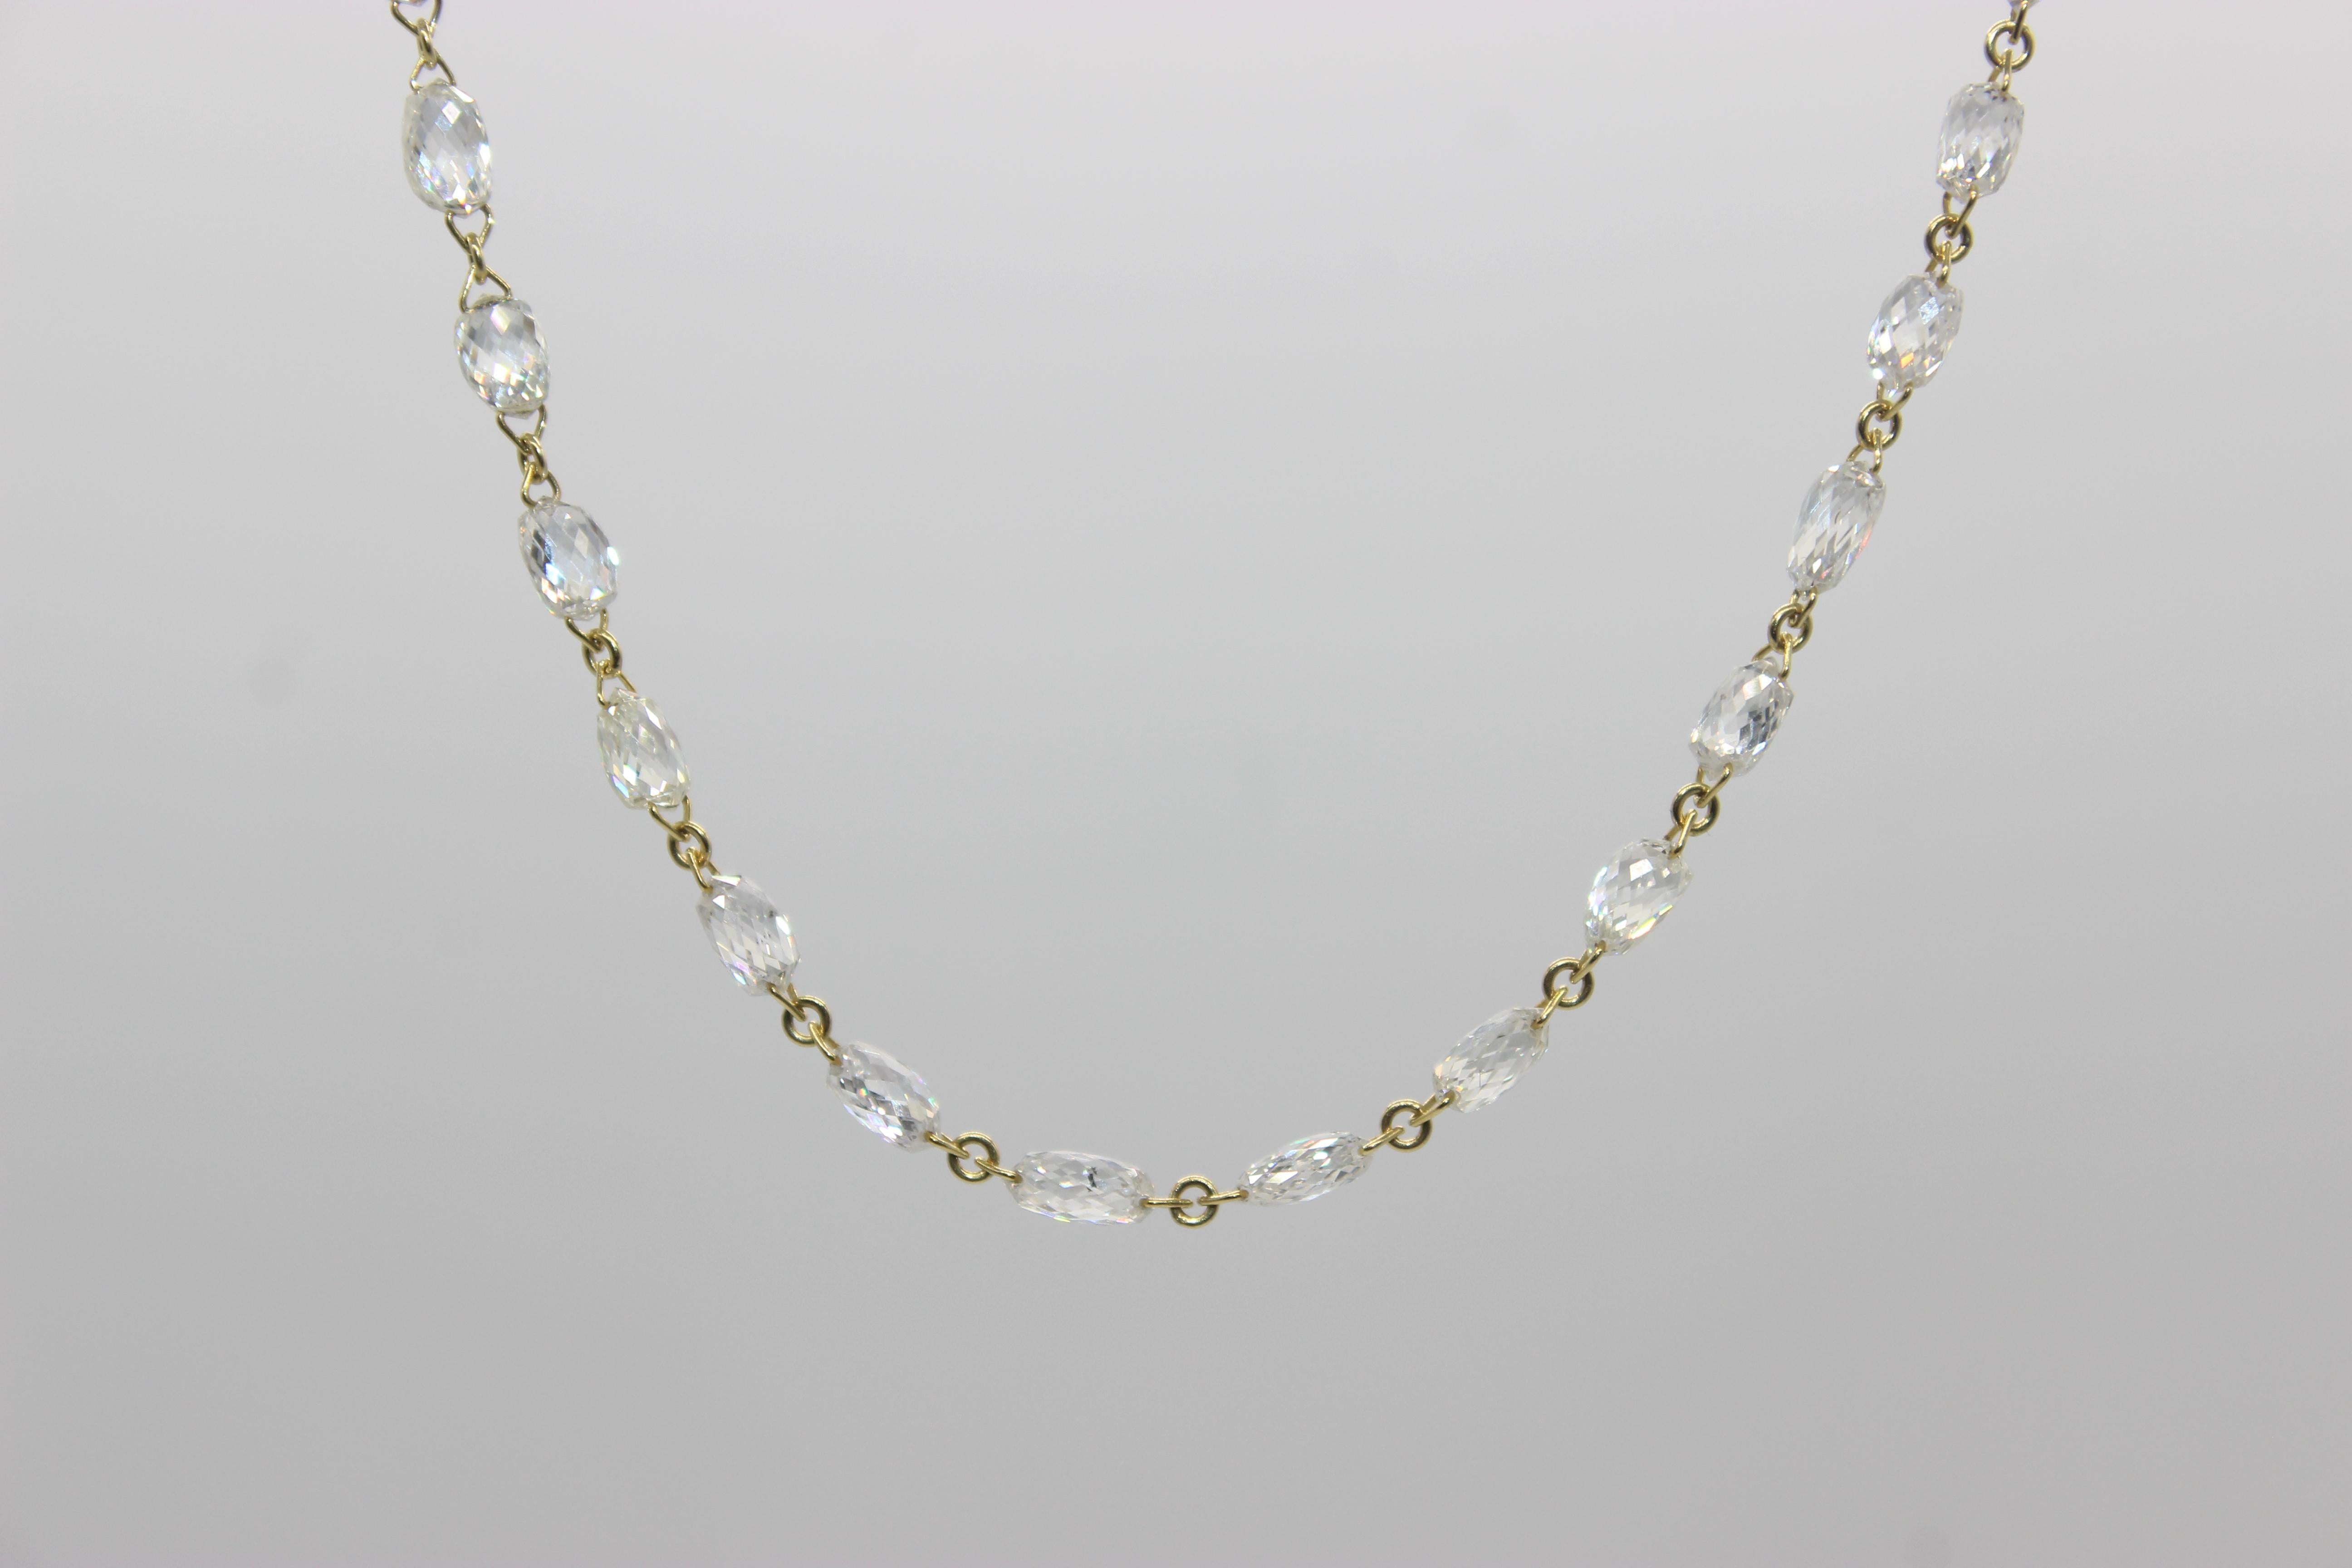 PANIM 6.79 Carat Diamond Briolette 18 Karat Yellow Gold Choker Necklace

A diamond briolette choker necklace is a timeless piece of jewelry that adds a touch of elegance and sophistication to any outfit. This Panim Diamond Briolette Choker necklace